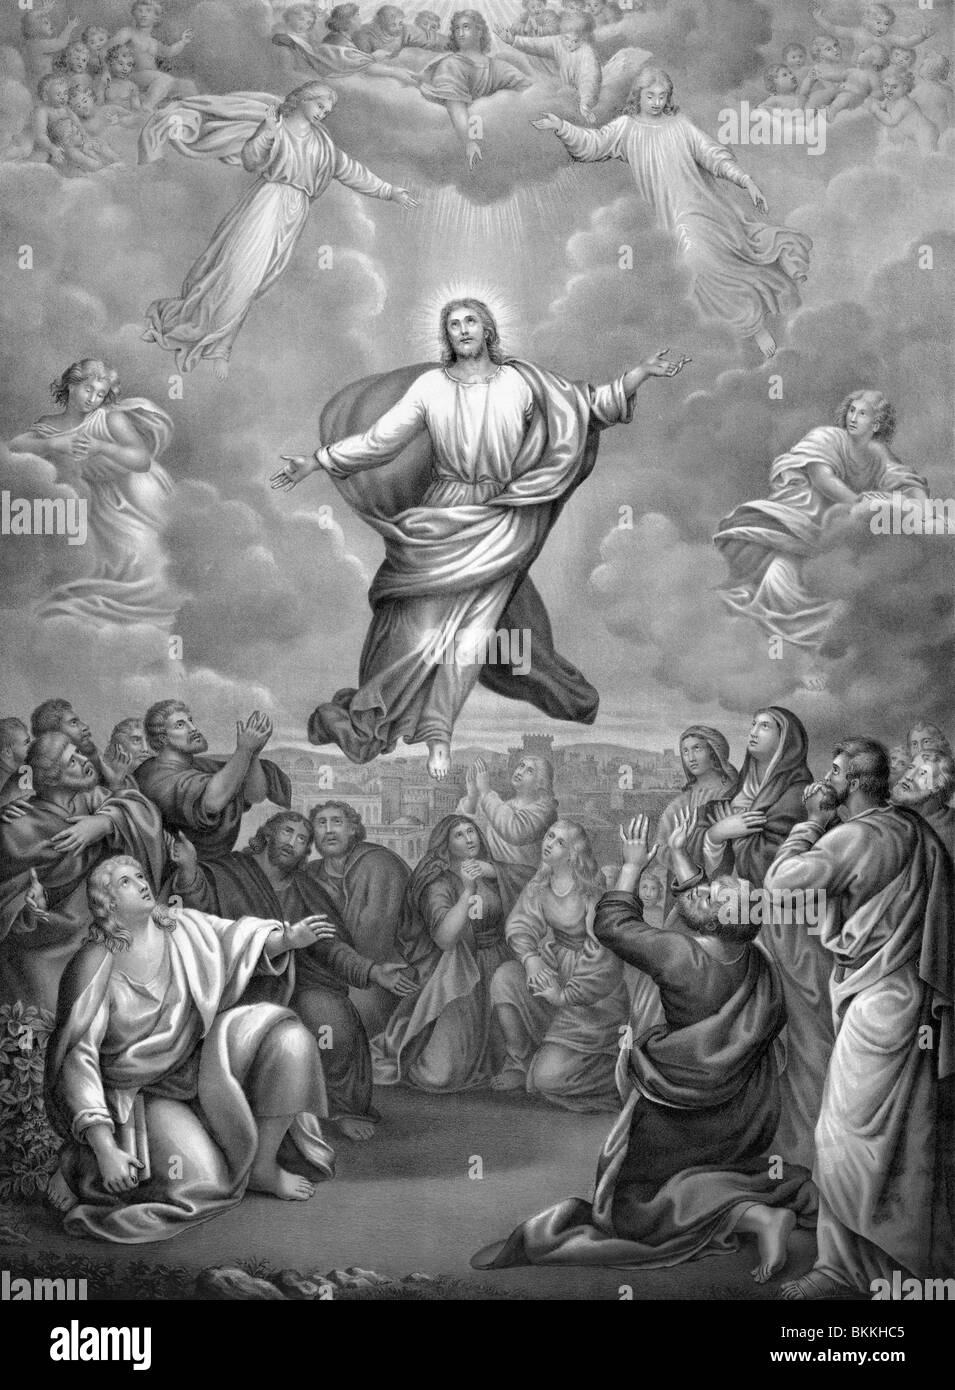 Vintage lithograph print circa 1884 depicting the Ascension of Jesus Christ to Heaven following his resurrection. Stock Photo